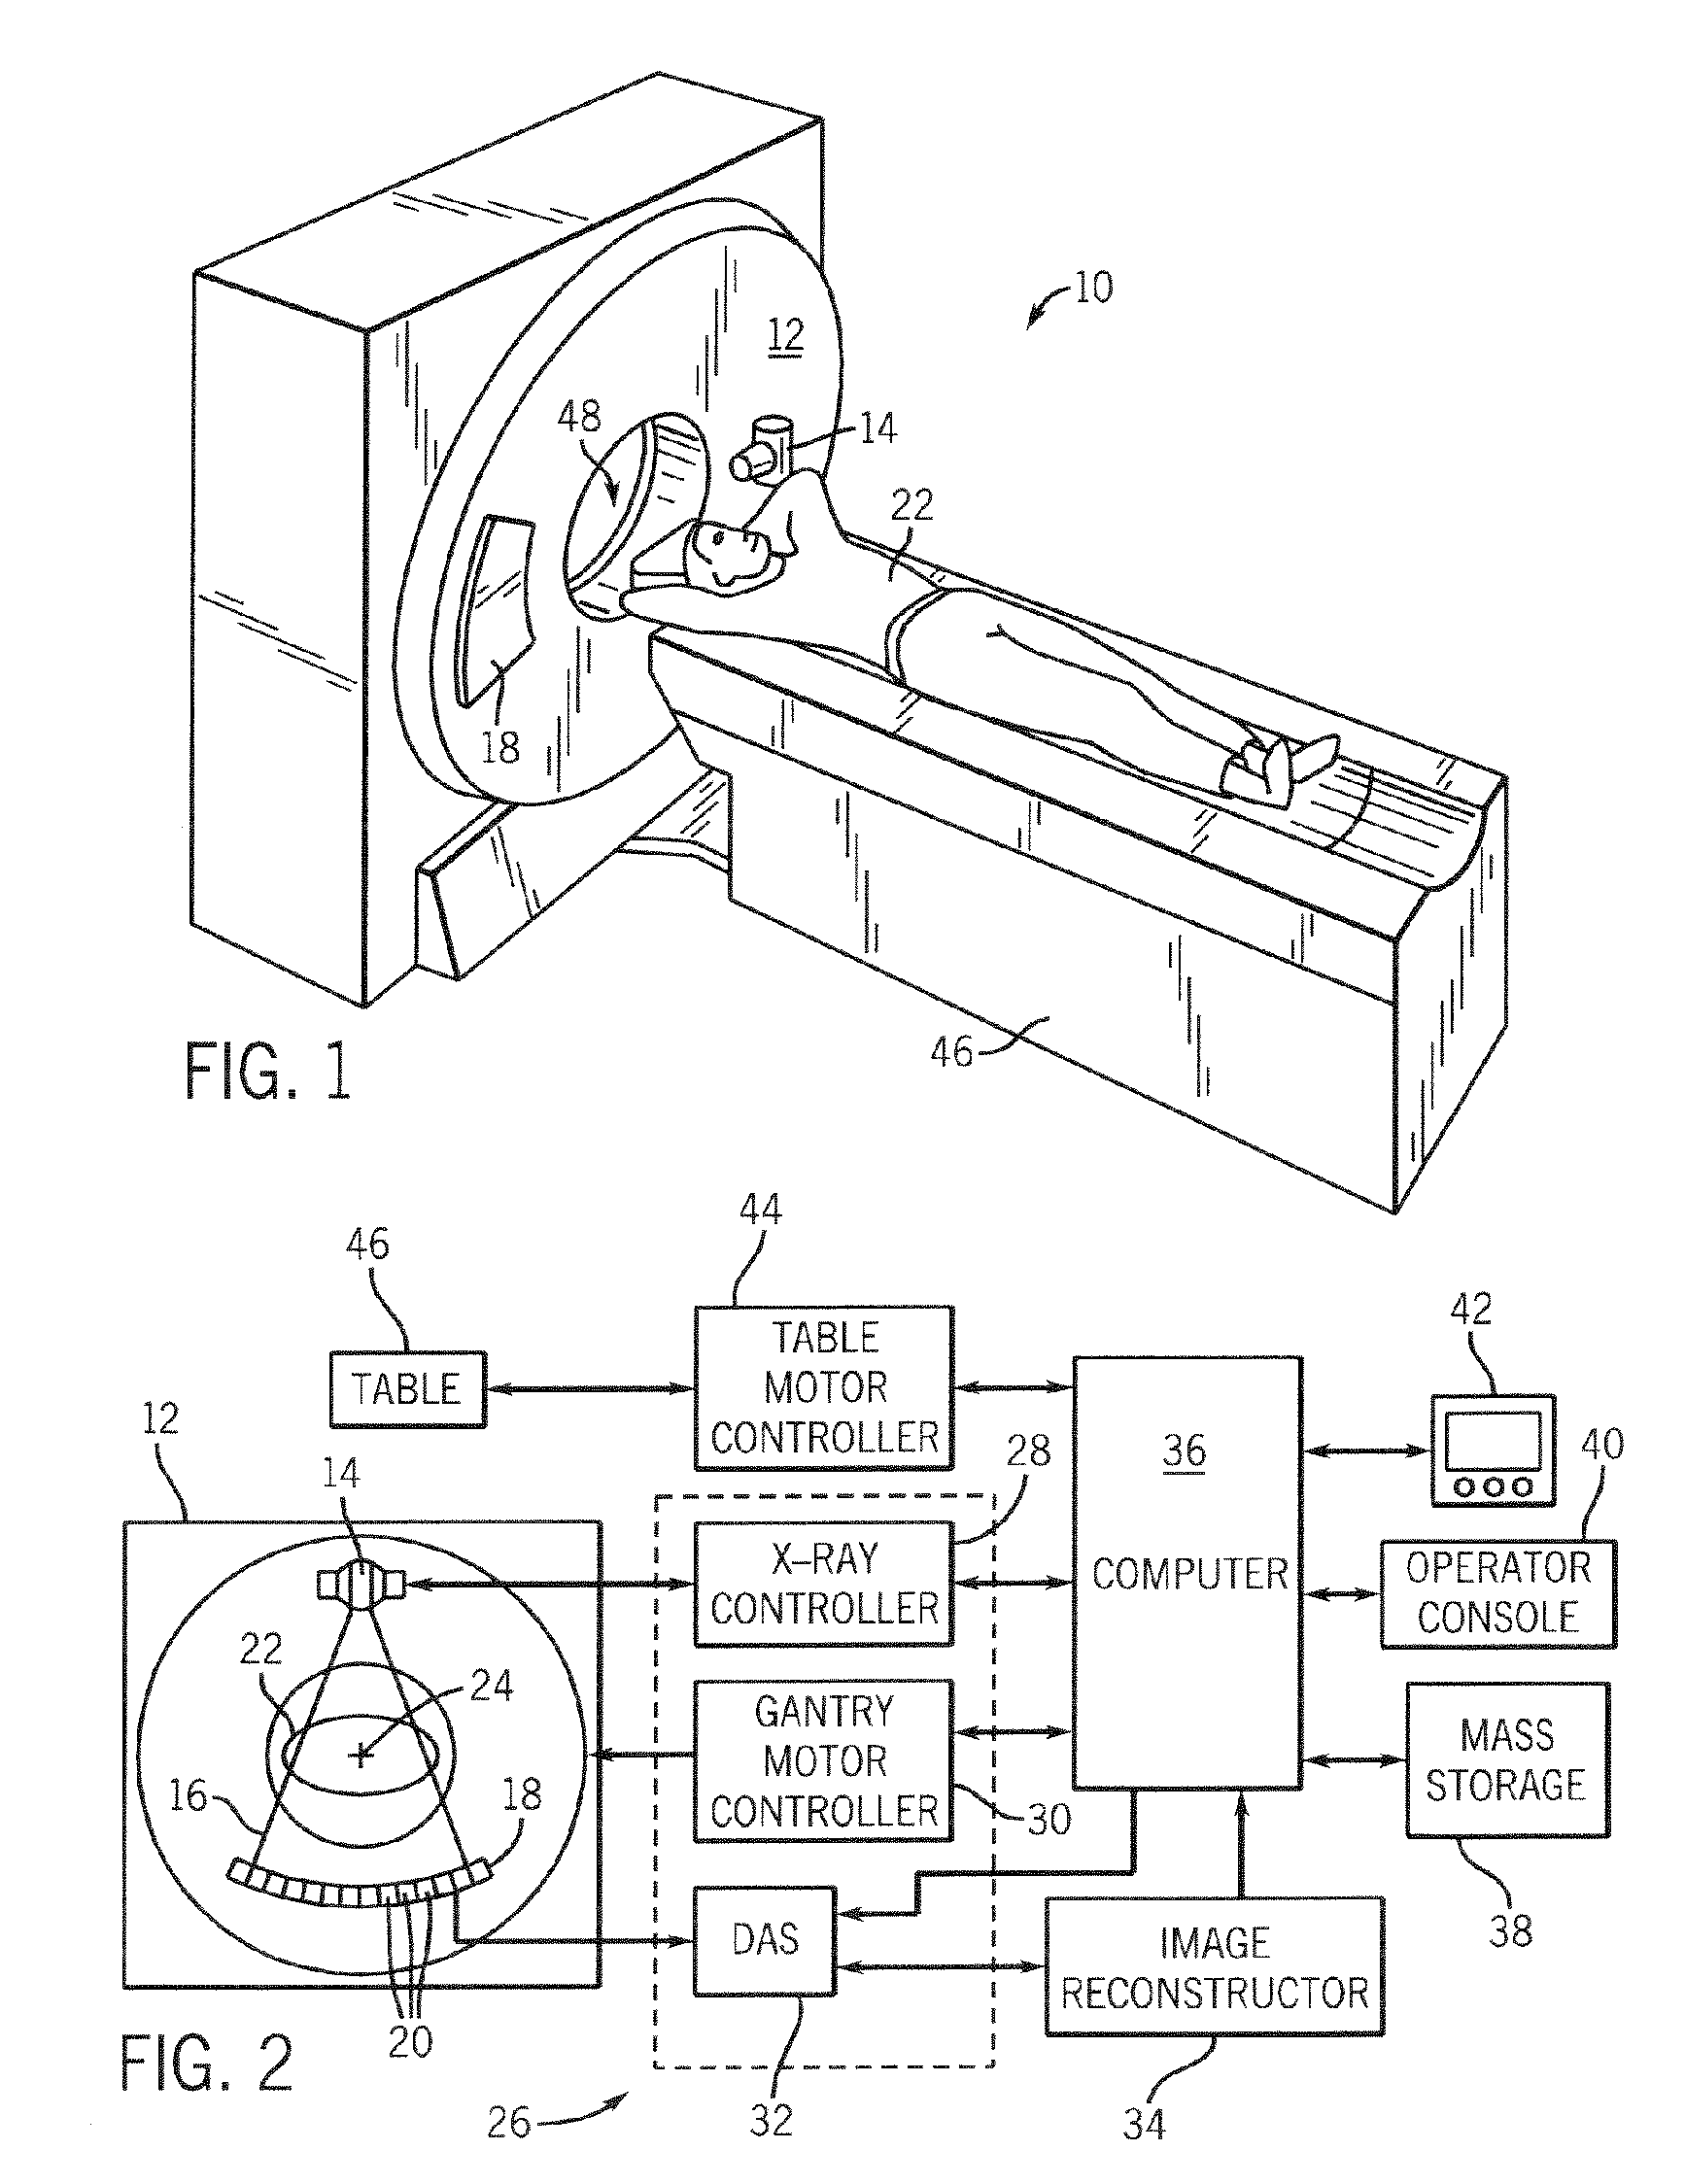 Method and system of dynamically controlling shaping time of a photon counting energy-sensitive radiation detector to accommodate variations in incident radiation flux levels